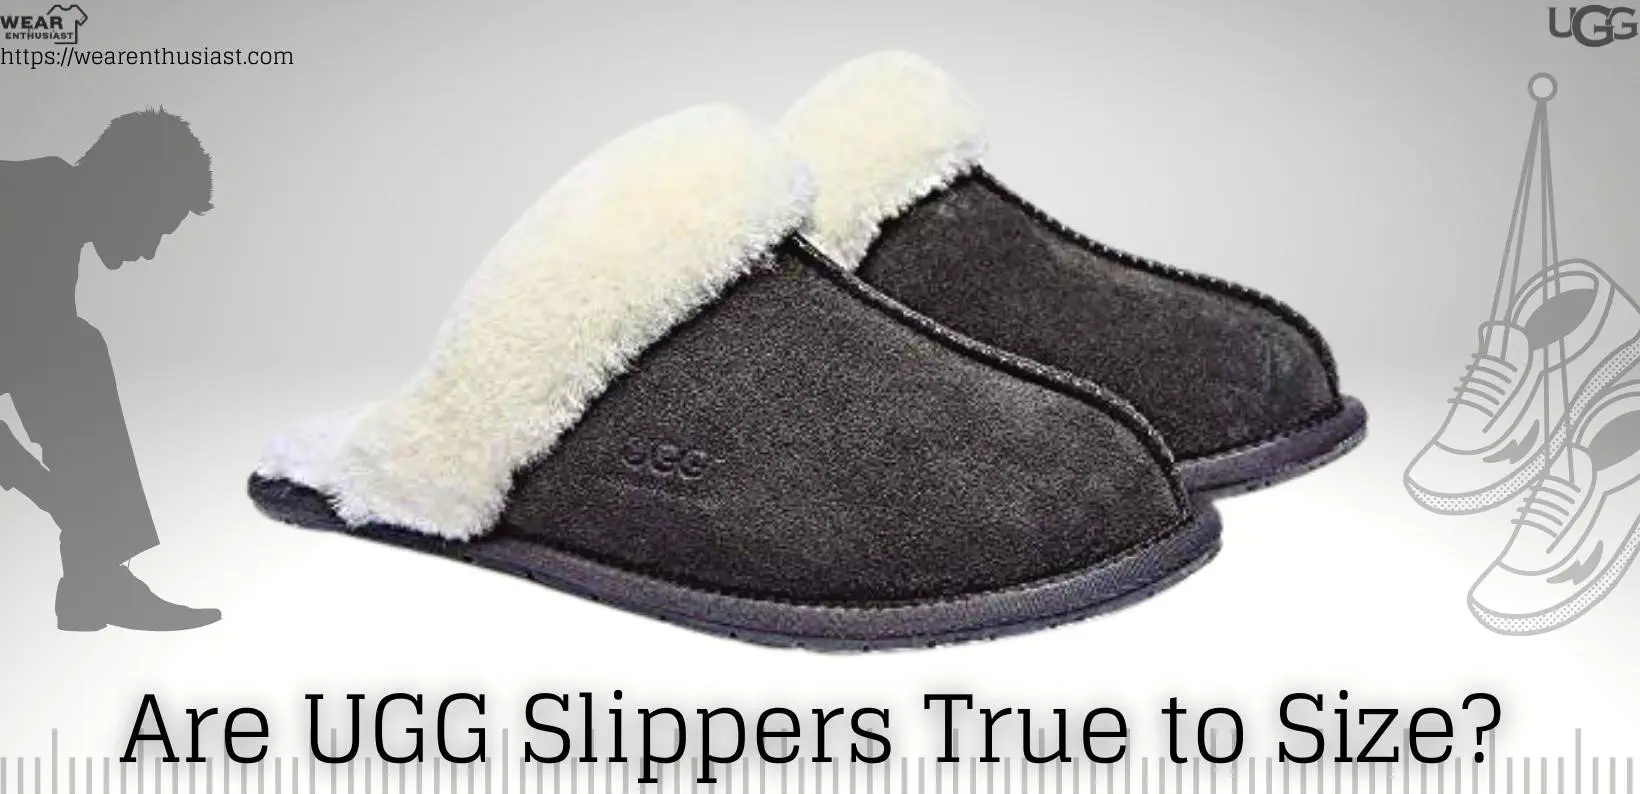 Are UGG slippers true to size?